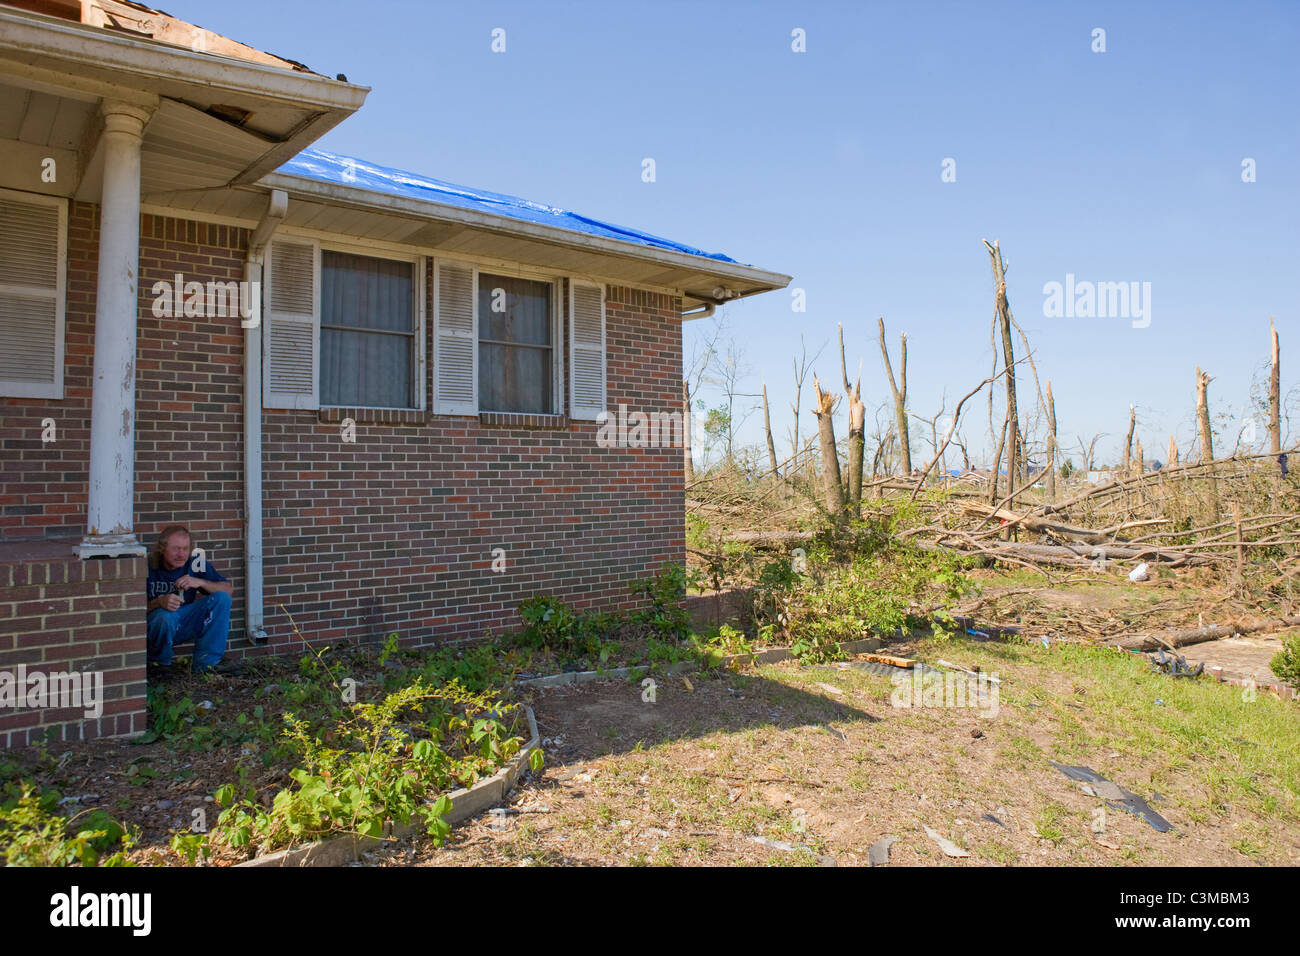 Man demonstrates where he hid when tornado struck his neighborhood, squatting down next to his porch, saved his life. Stock Photo